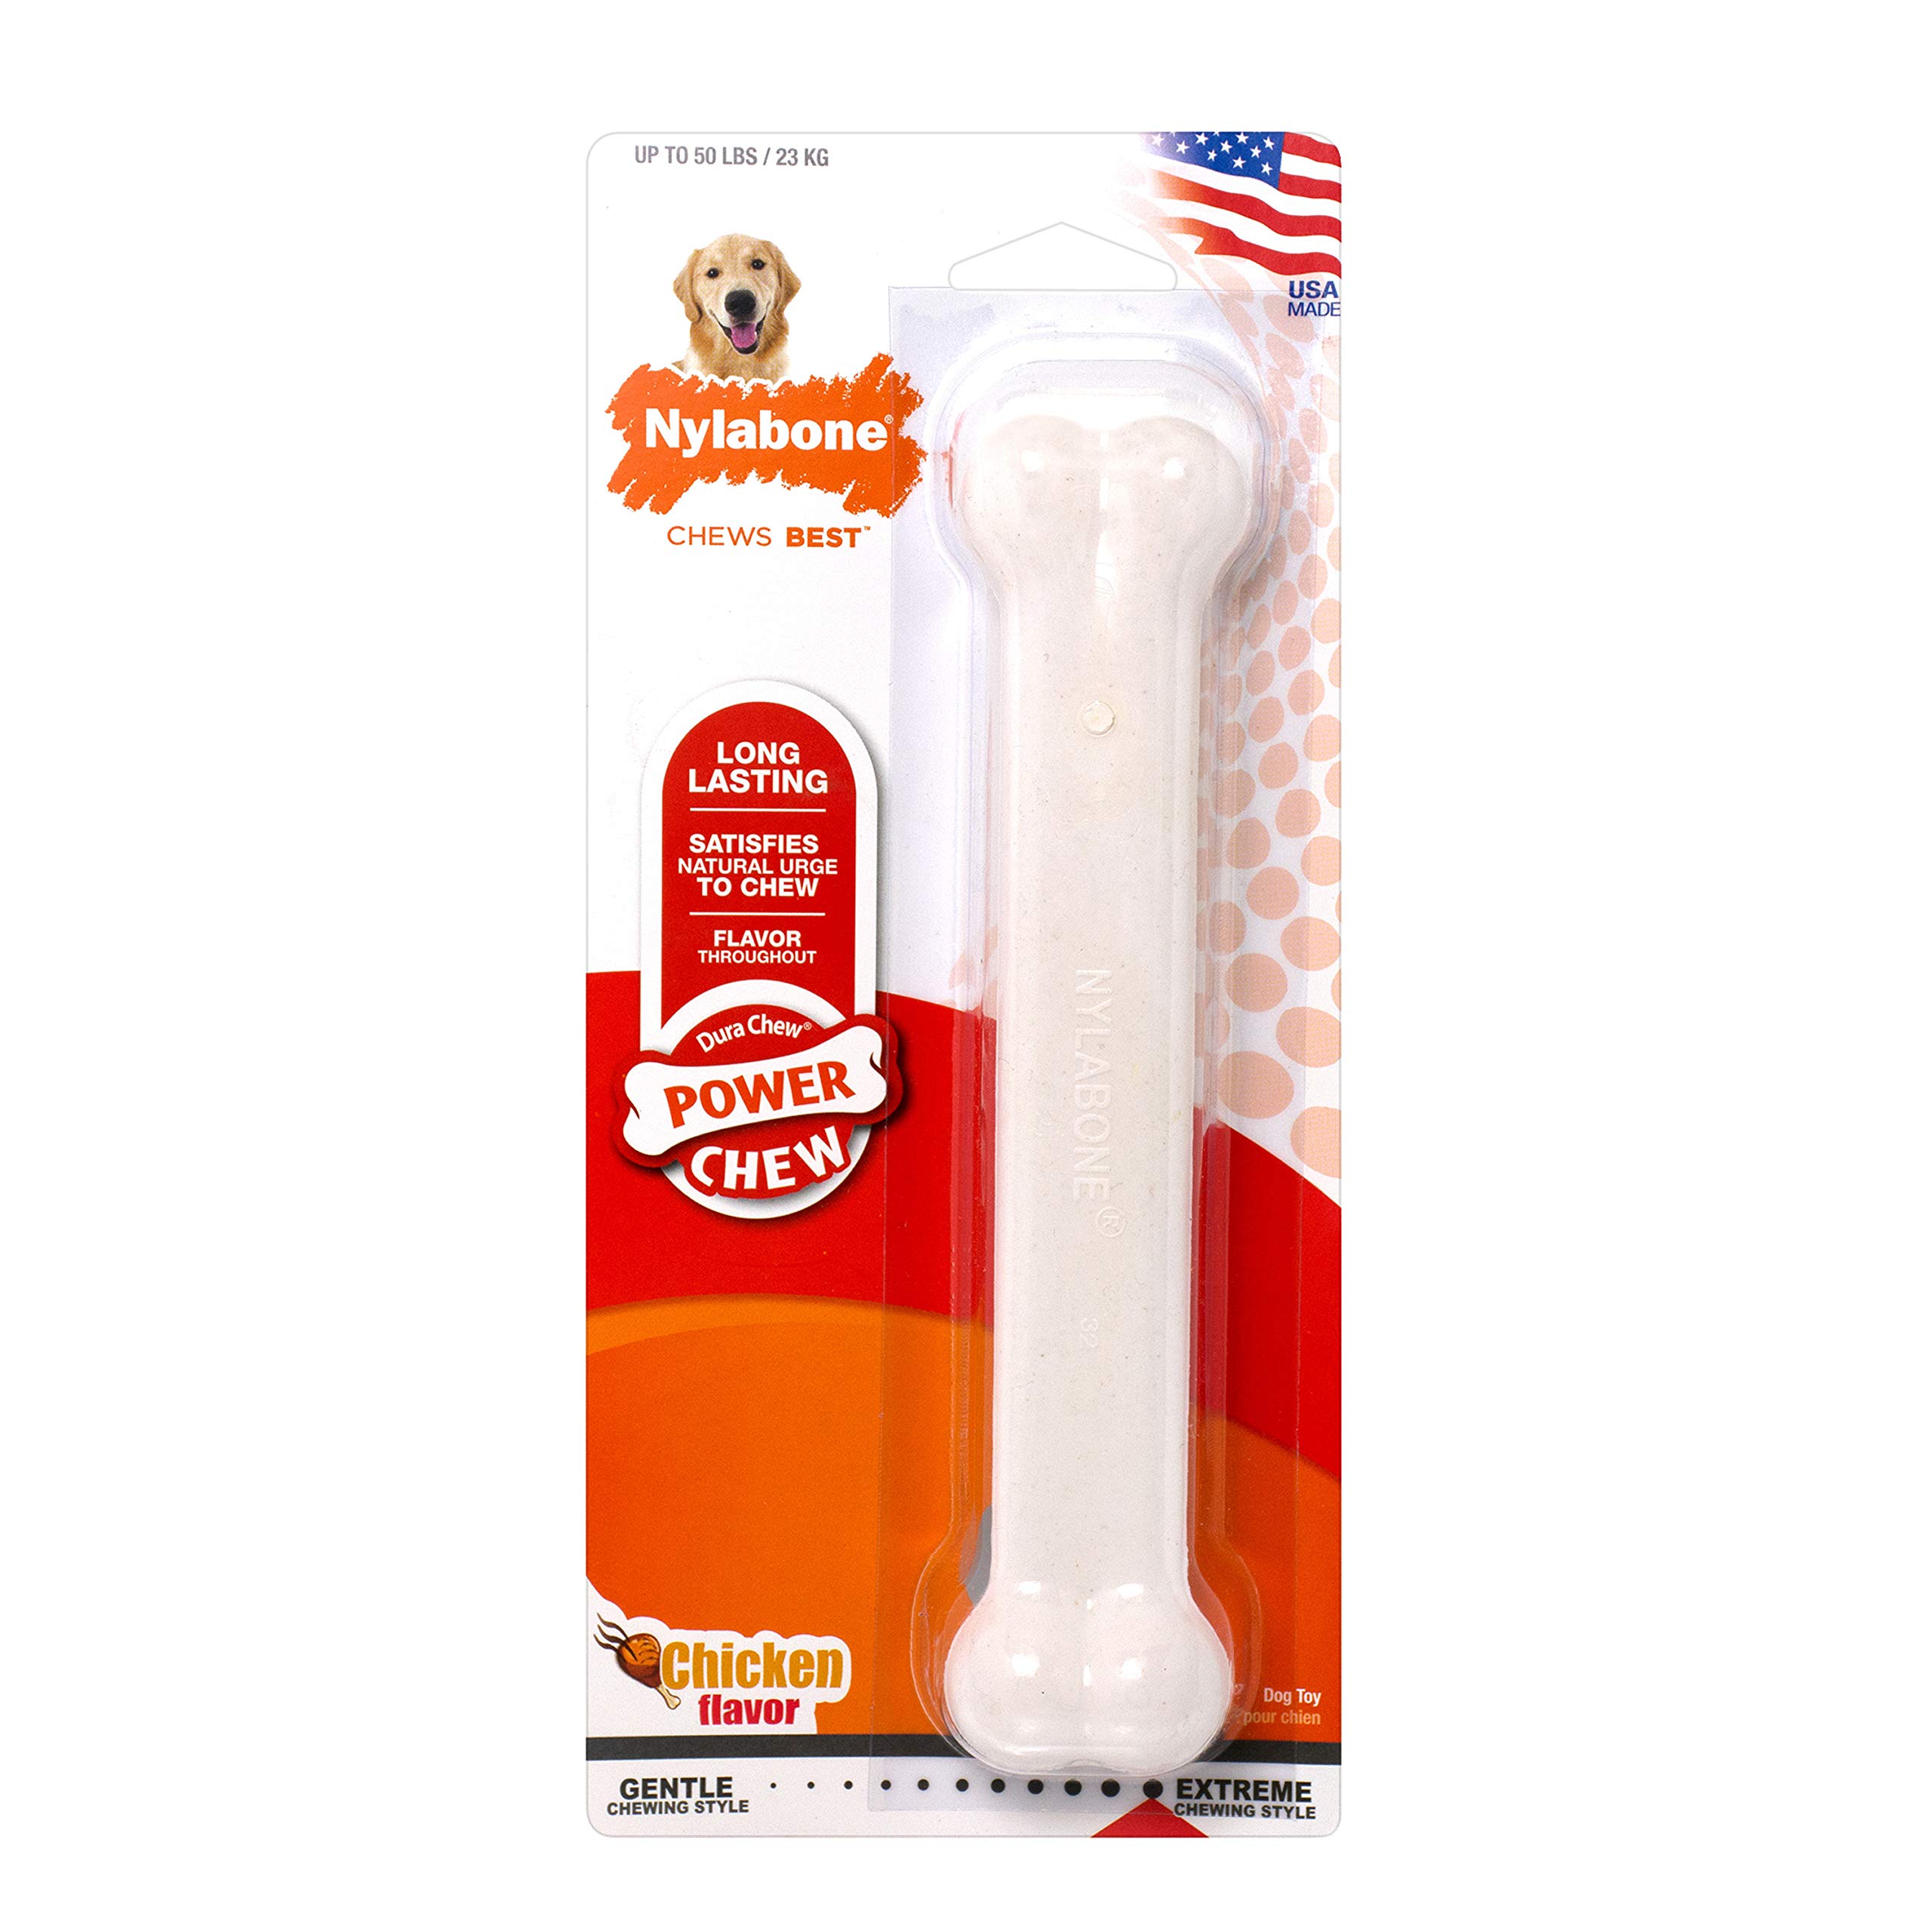 Nylabone Power Chew Flavored Durable Chew Toy for Dogs Chicken Large/Giant